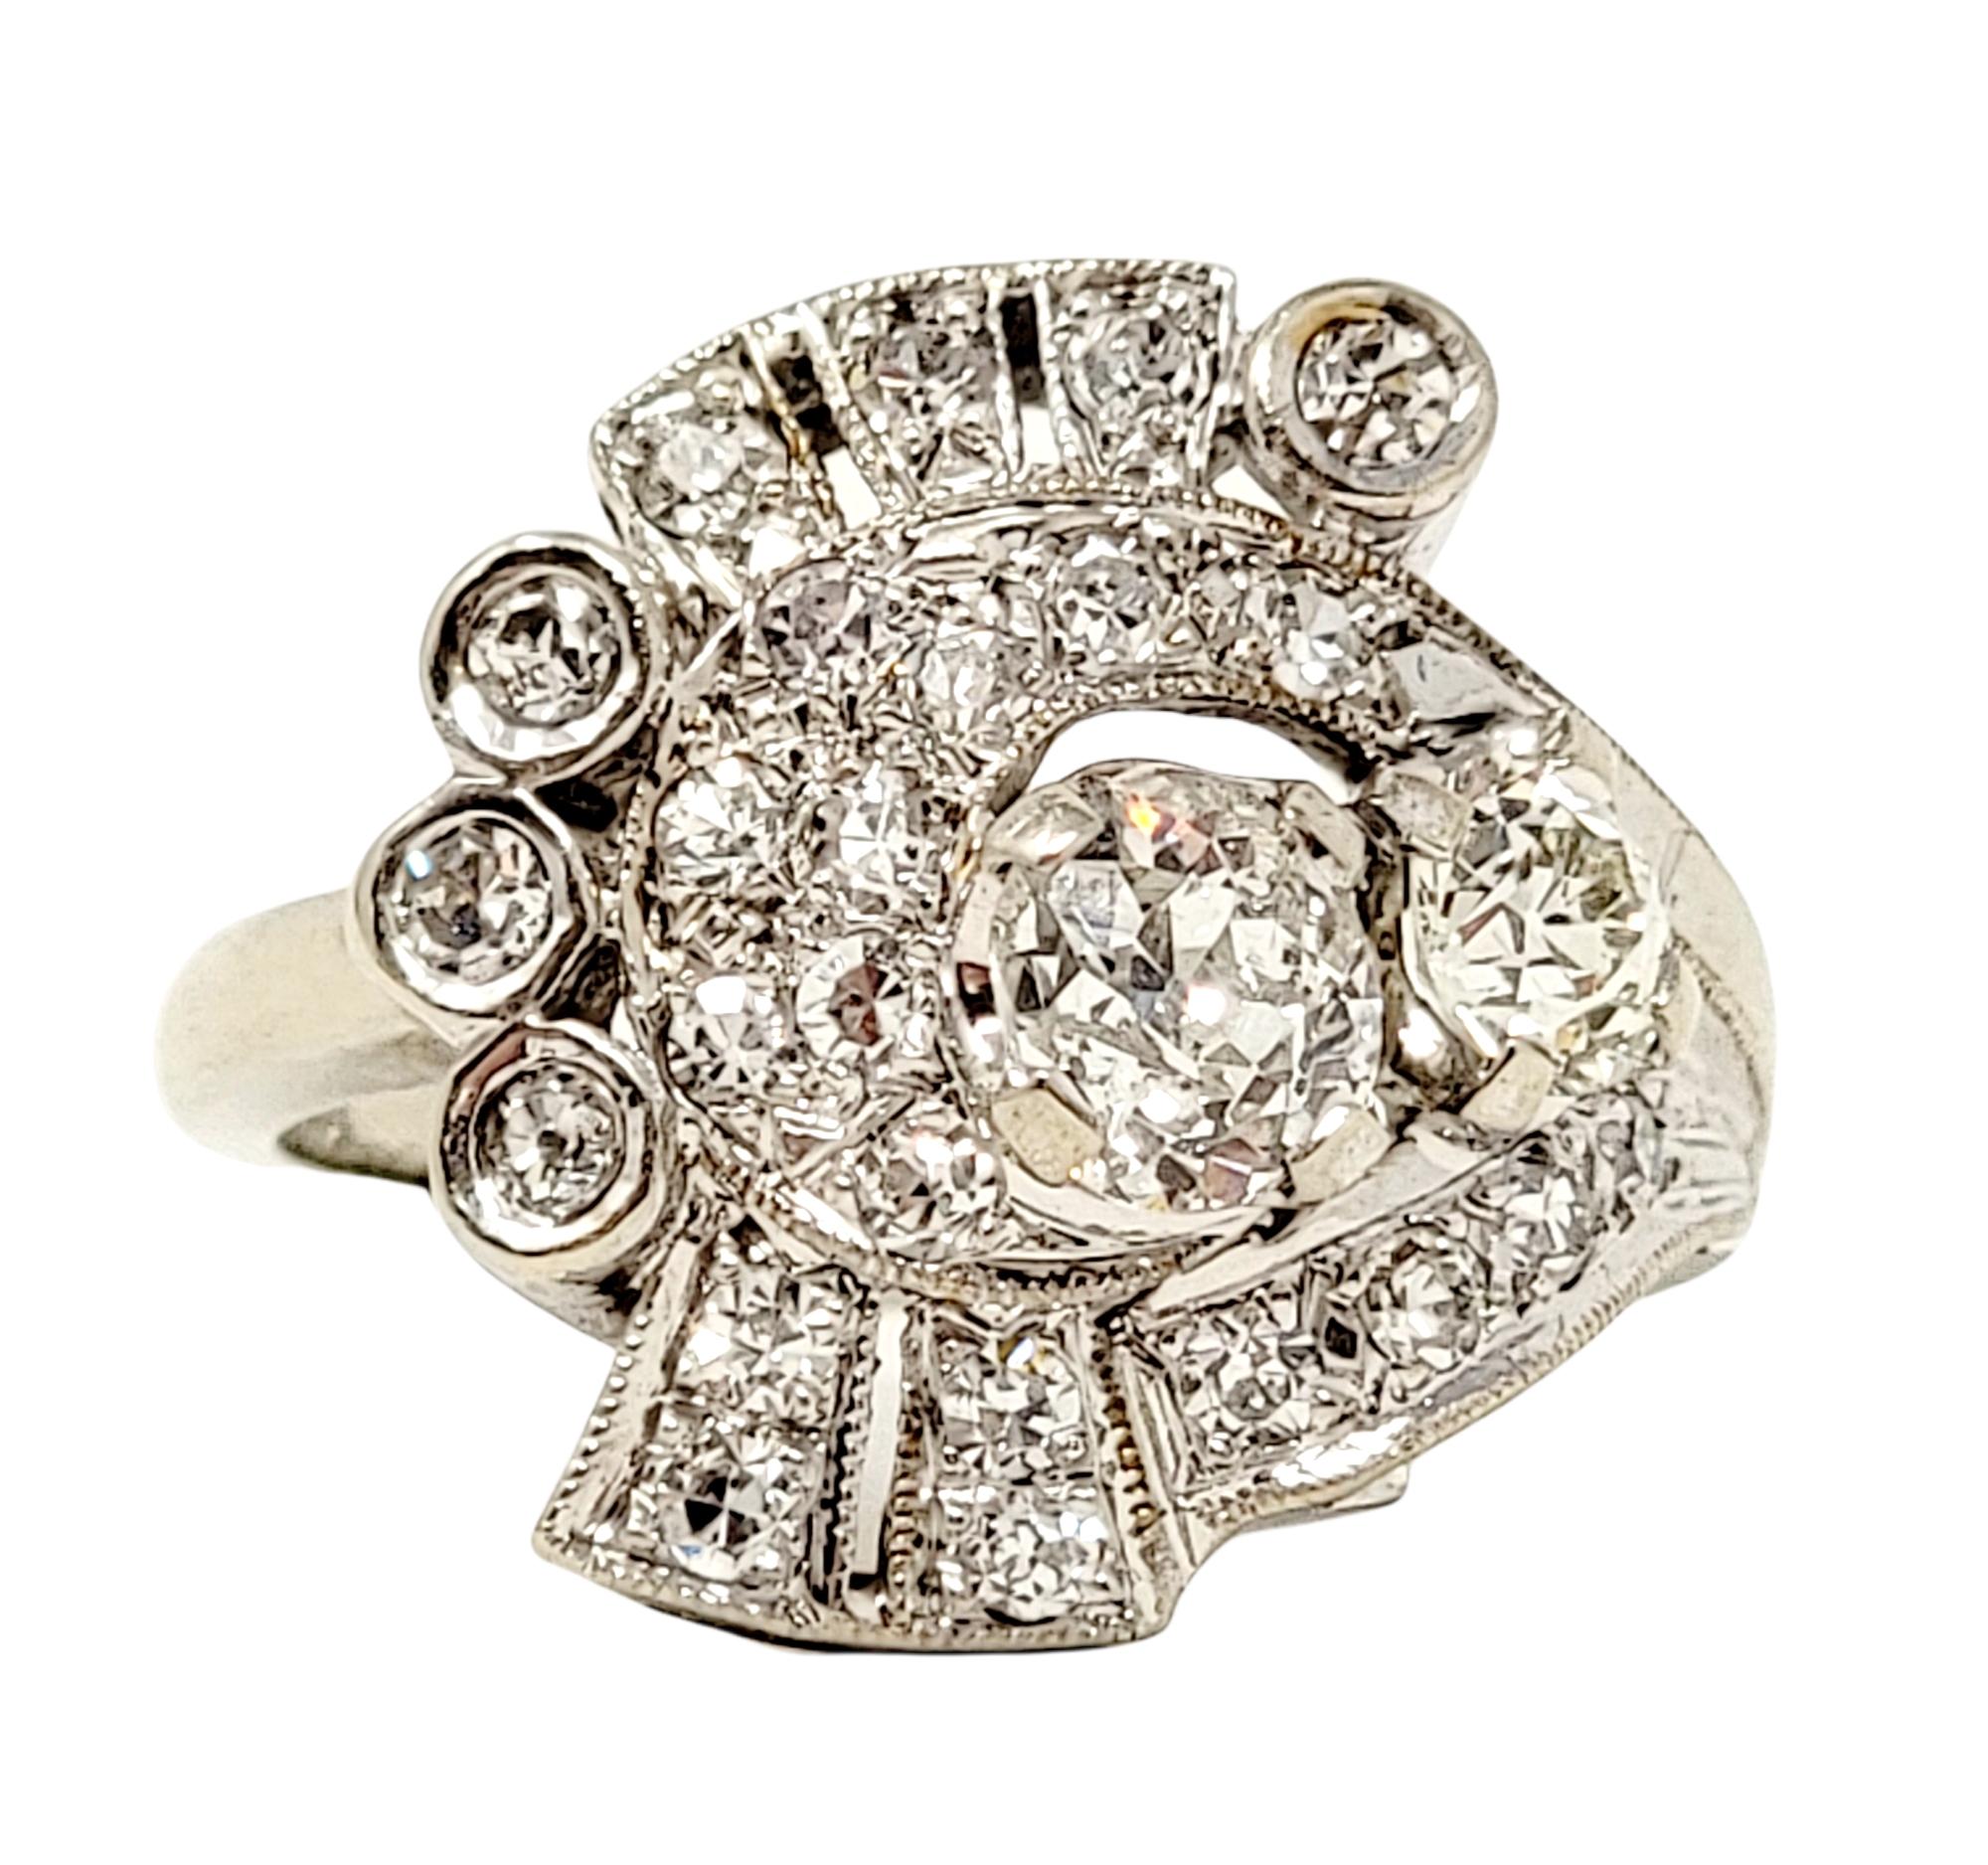 Ring size: 5.25

Beautiful vintage diamond ring arranged in a unique artful design.  It features 26 Old Mine cut diamonds (I-J/ I1) bezel, prong and bead set in a variety of shapes and sizes in an asymmetric swirl-like pattern. The diamonds are set